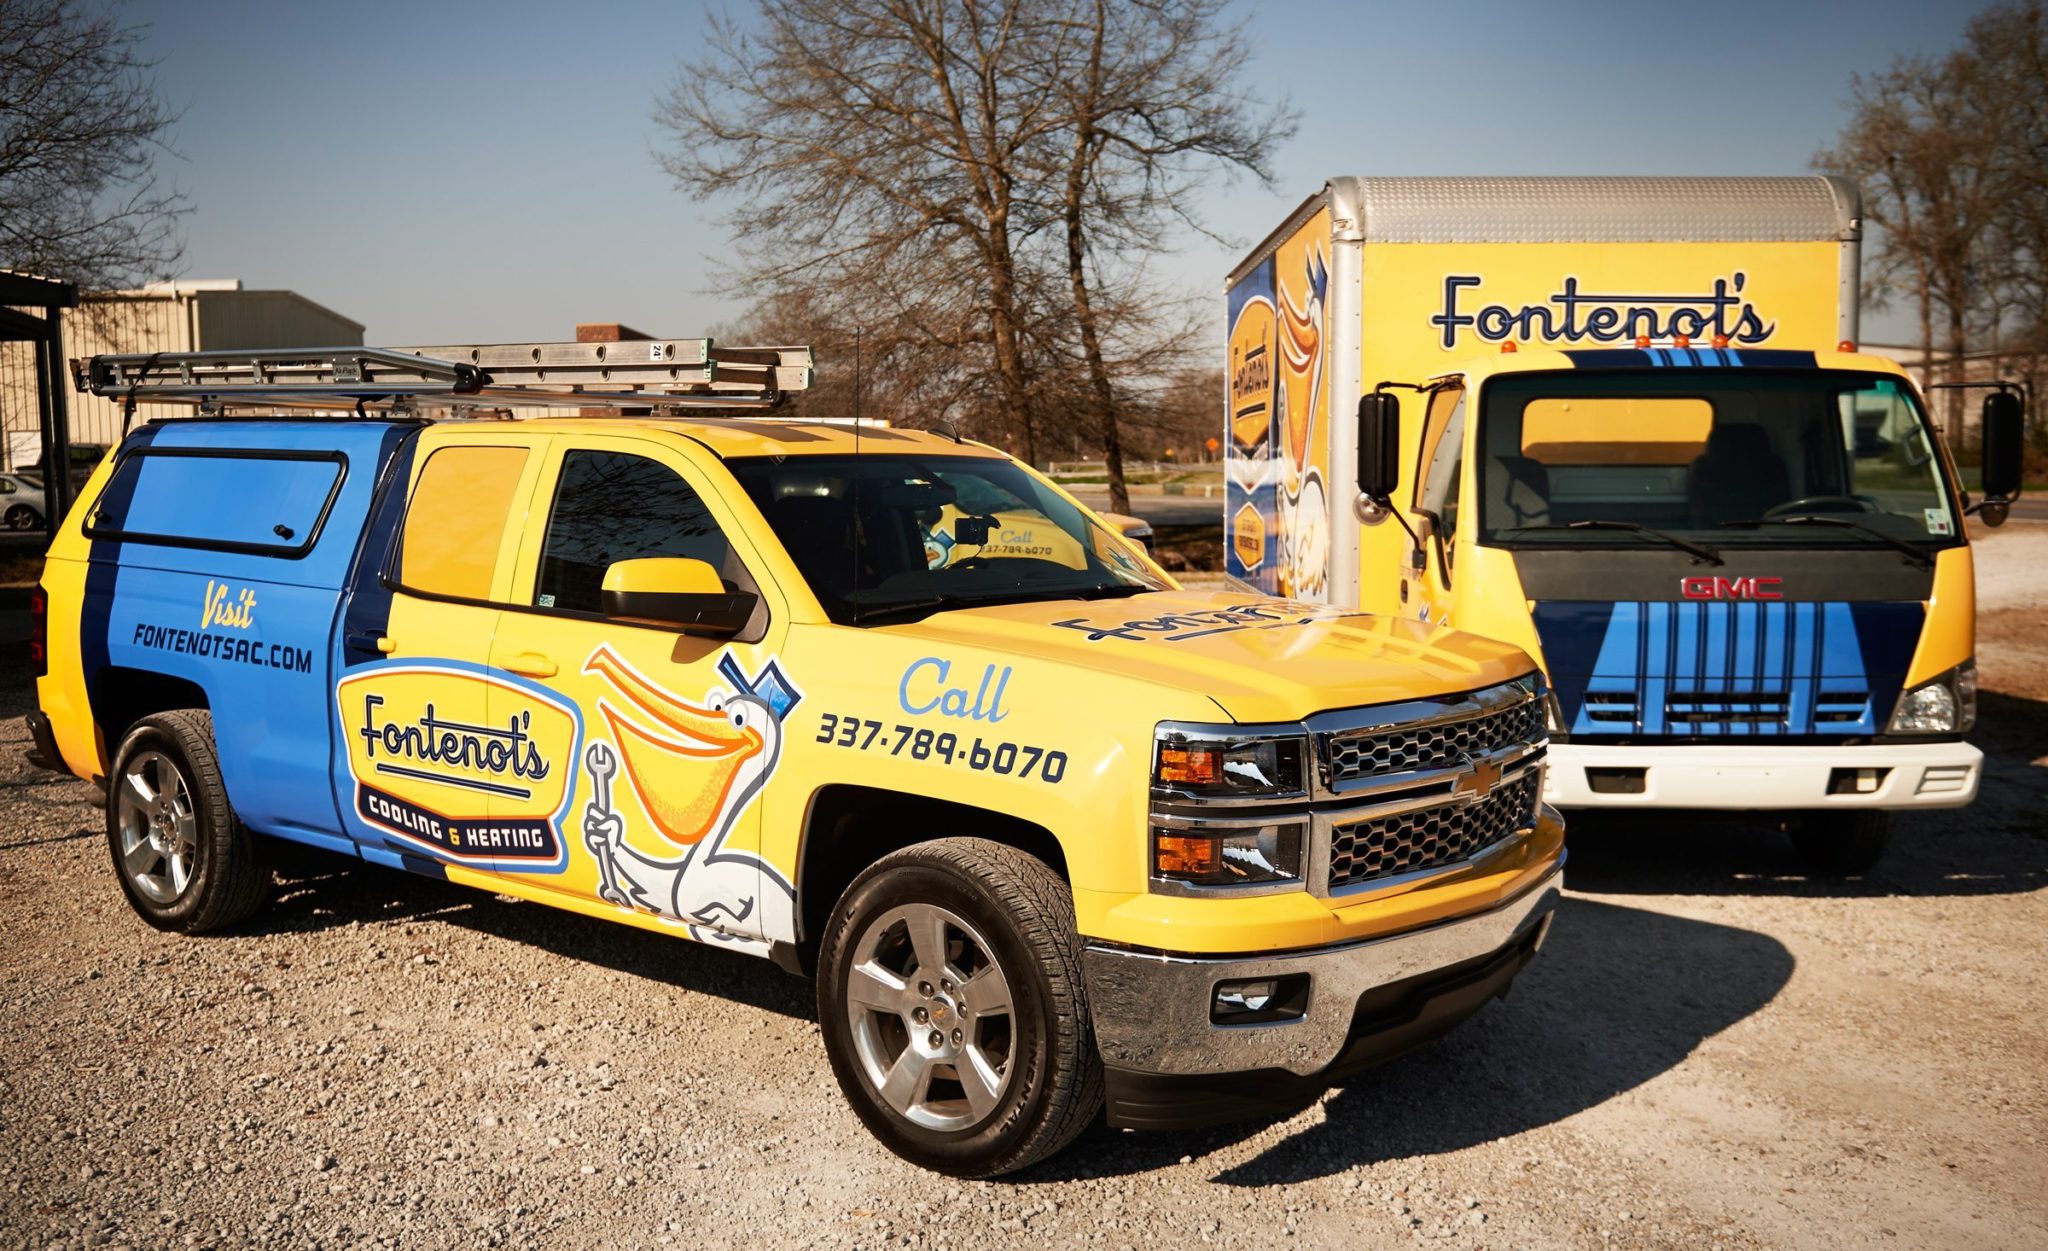 Fontenot's retro-style vehicle wrap instantly conveys the message that the business runs decades deep—and that it is a company that consumers can trust.